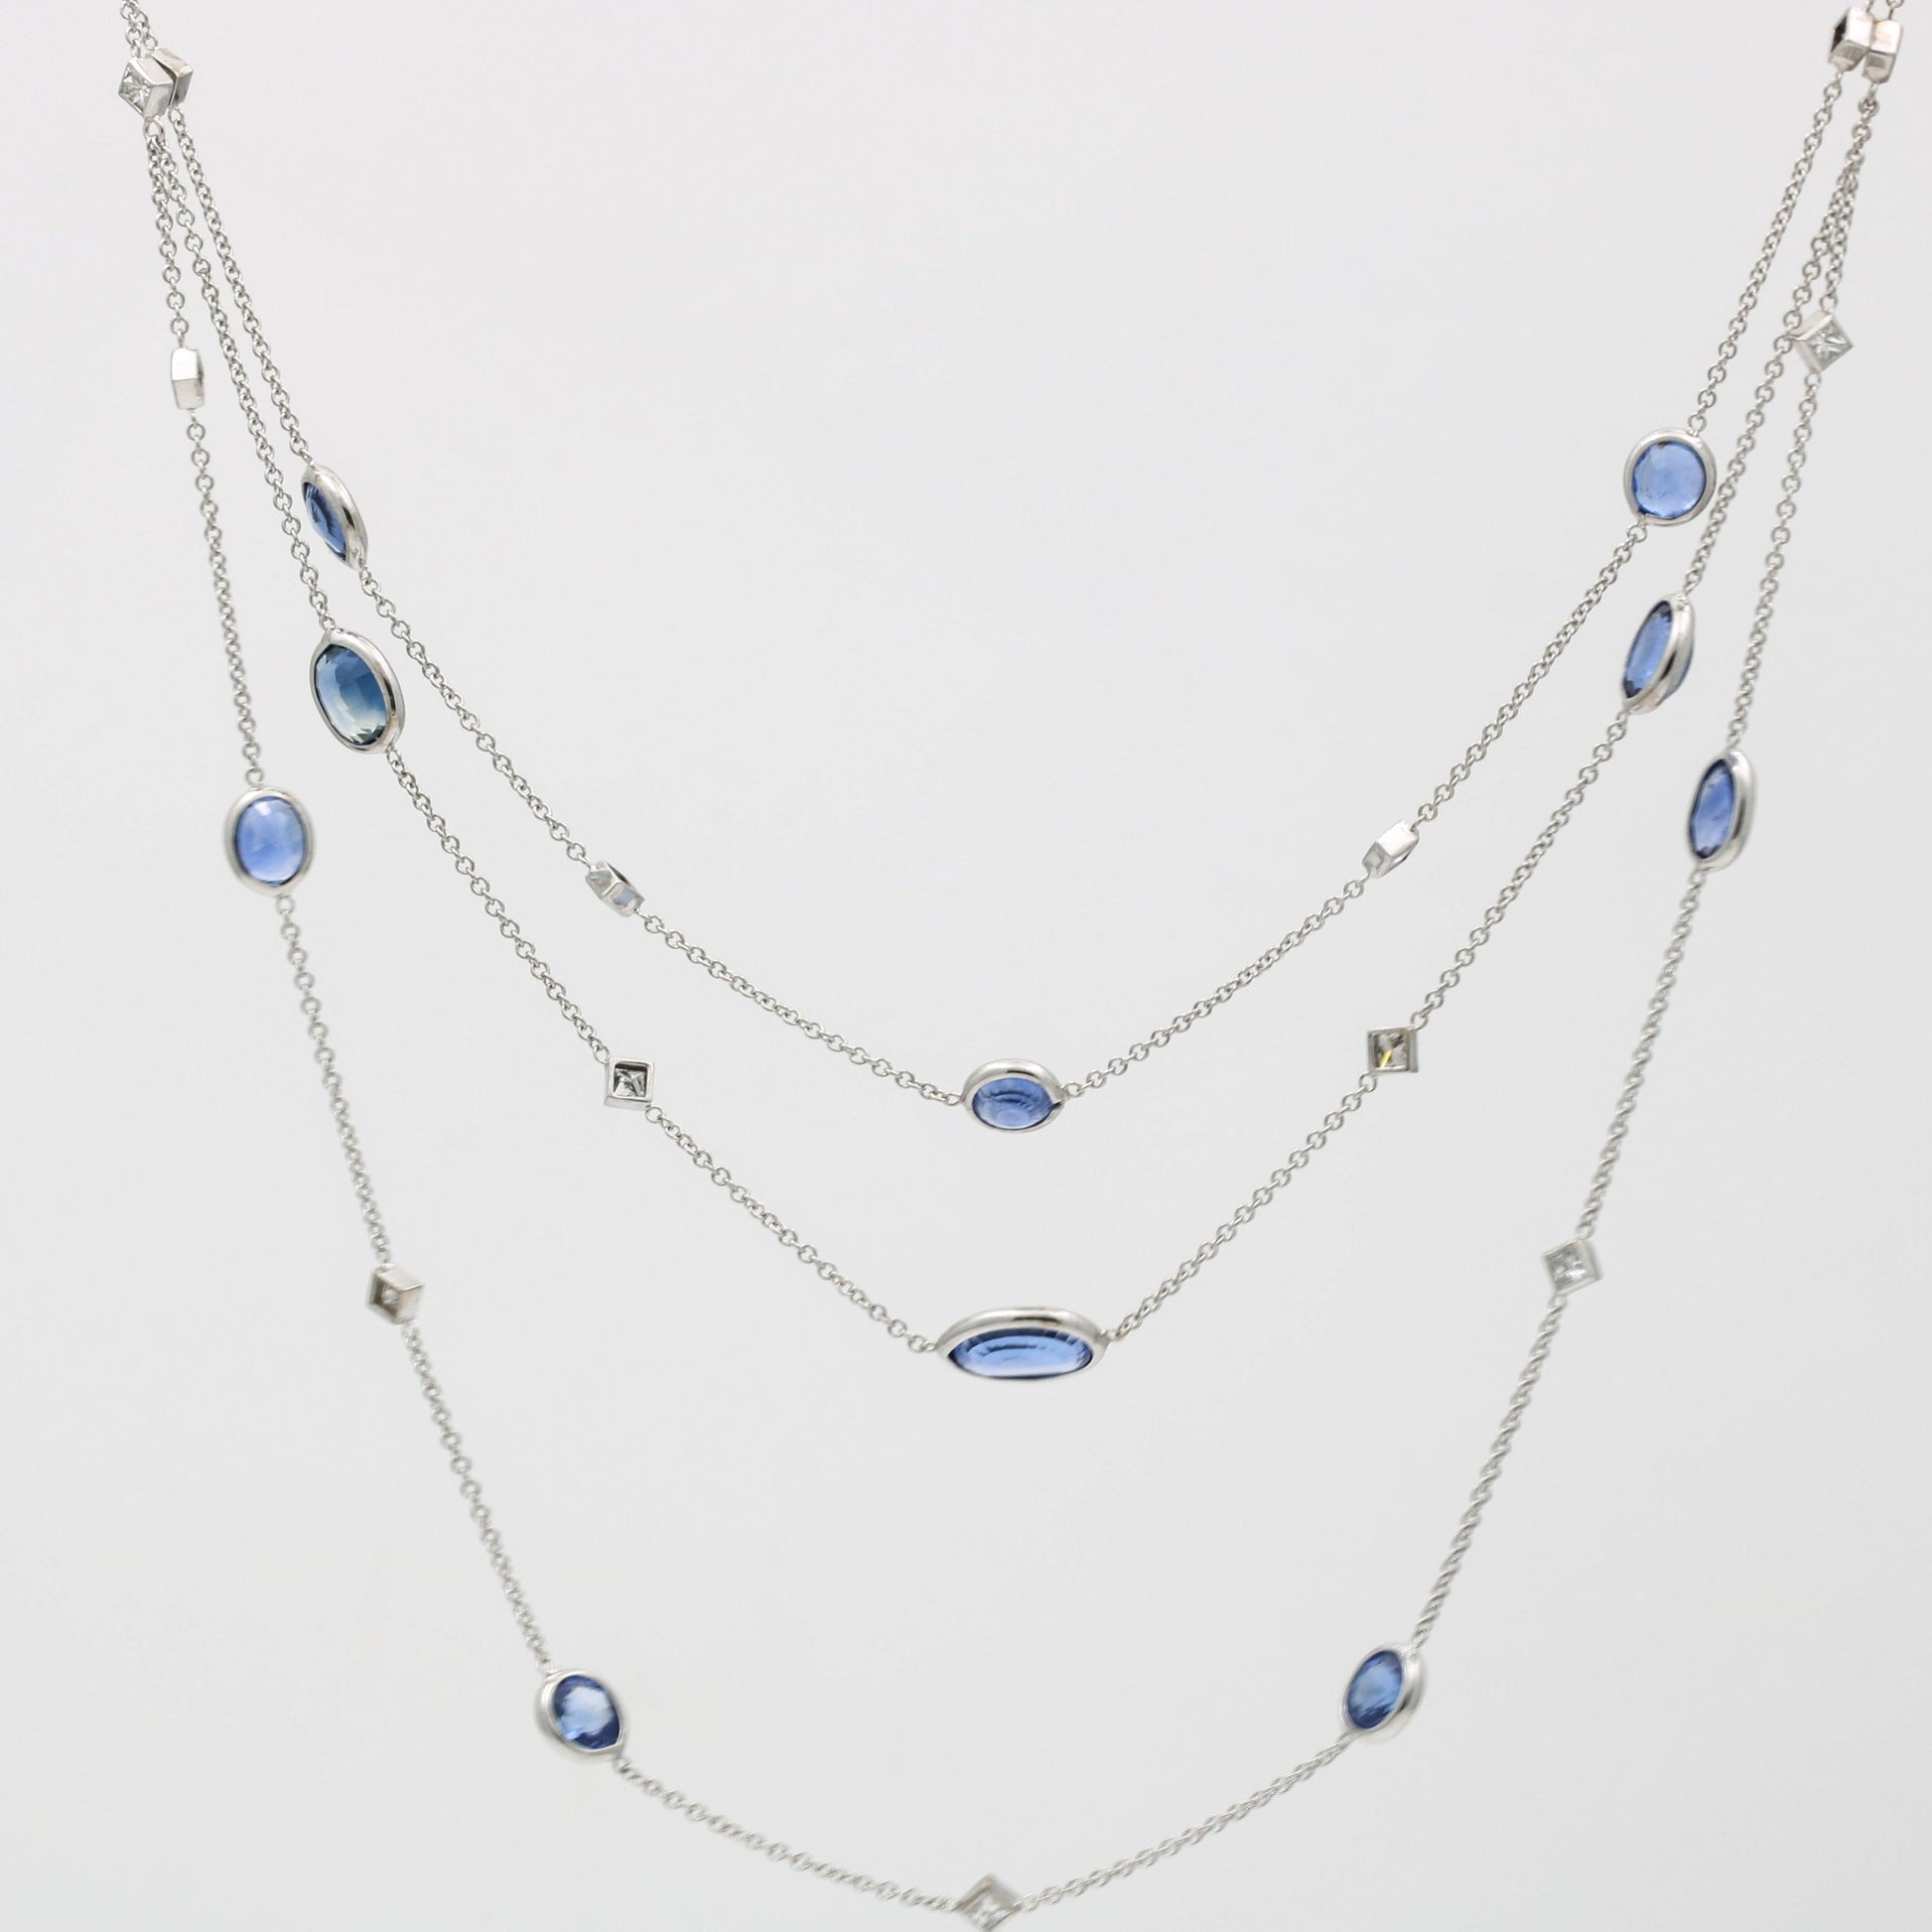 Women's Blue Sapphire and Diamond 18k Gold Station Necklace Layered Chains - 31 Jewels Inc.